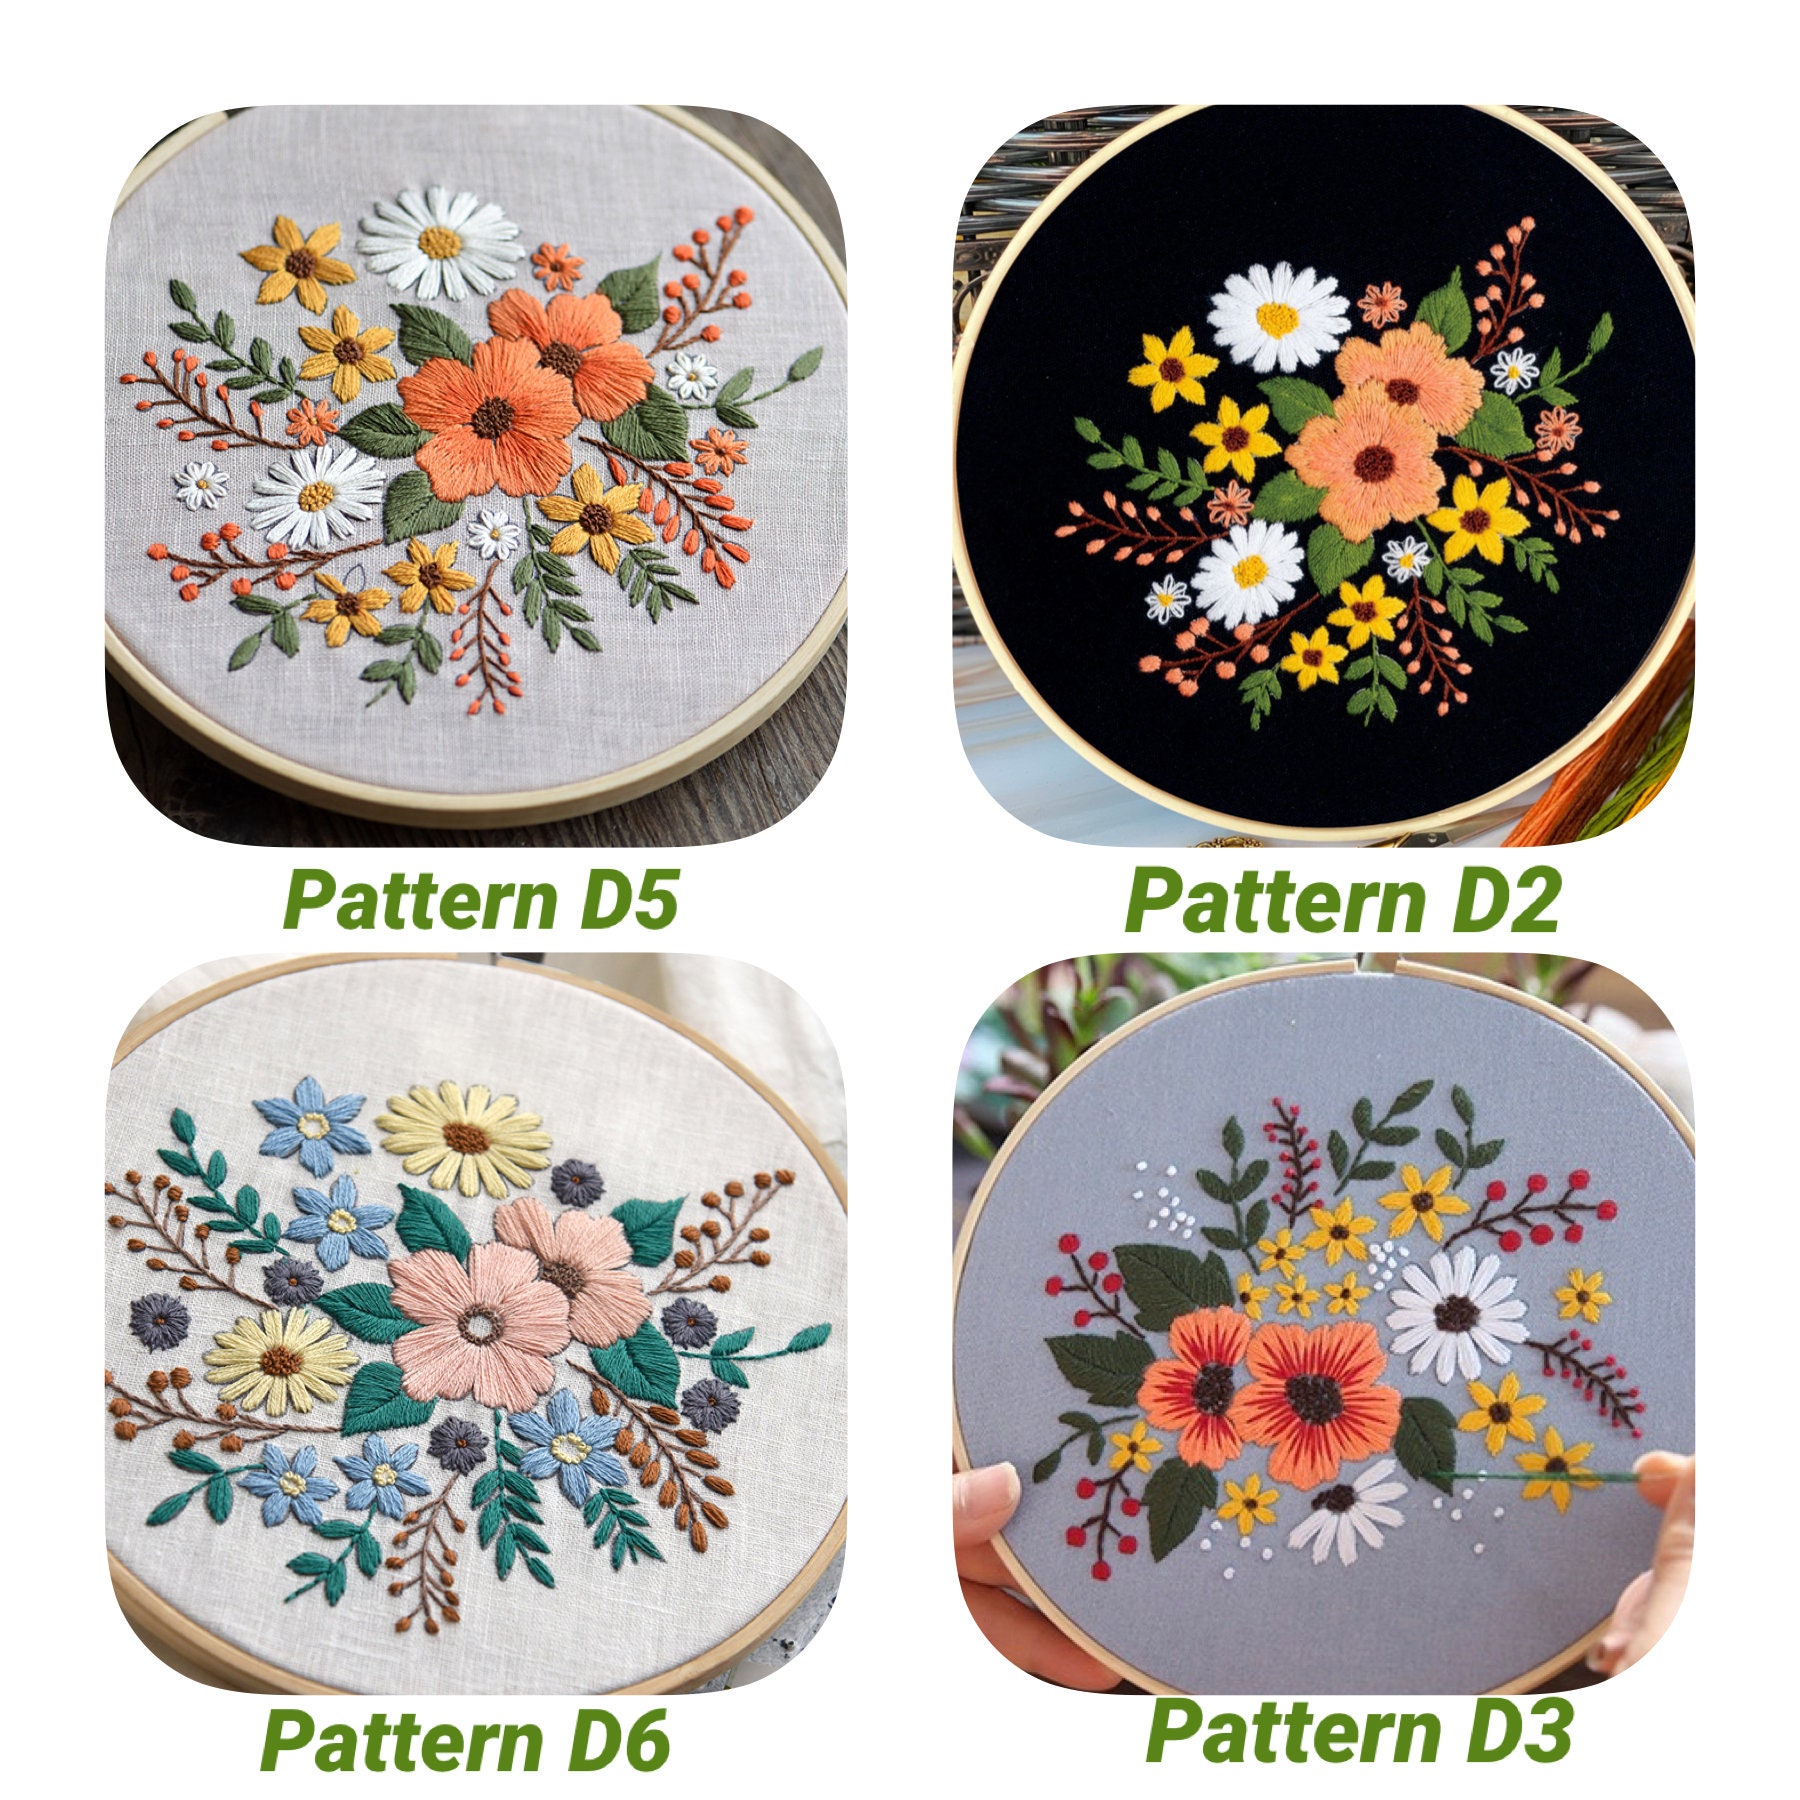 Flowers Embroidery Full Kit with Needlepoint Hoop cross stitch DIY Craft Kit Beginner Embroidery Kit Embroidery Kit For Beginner floral